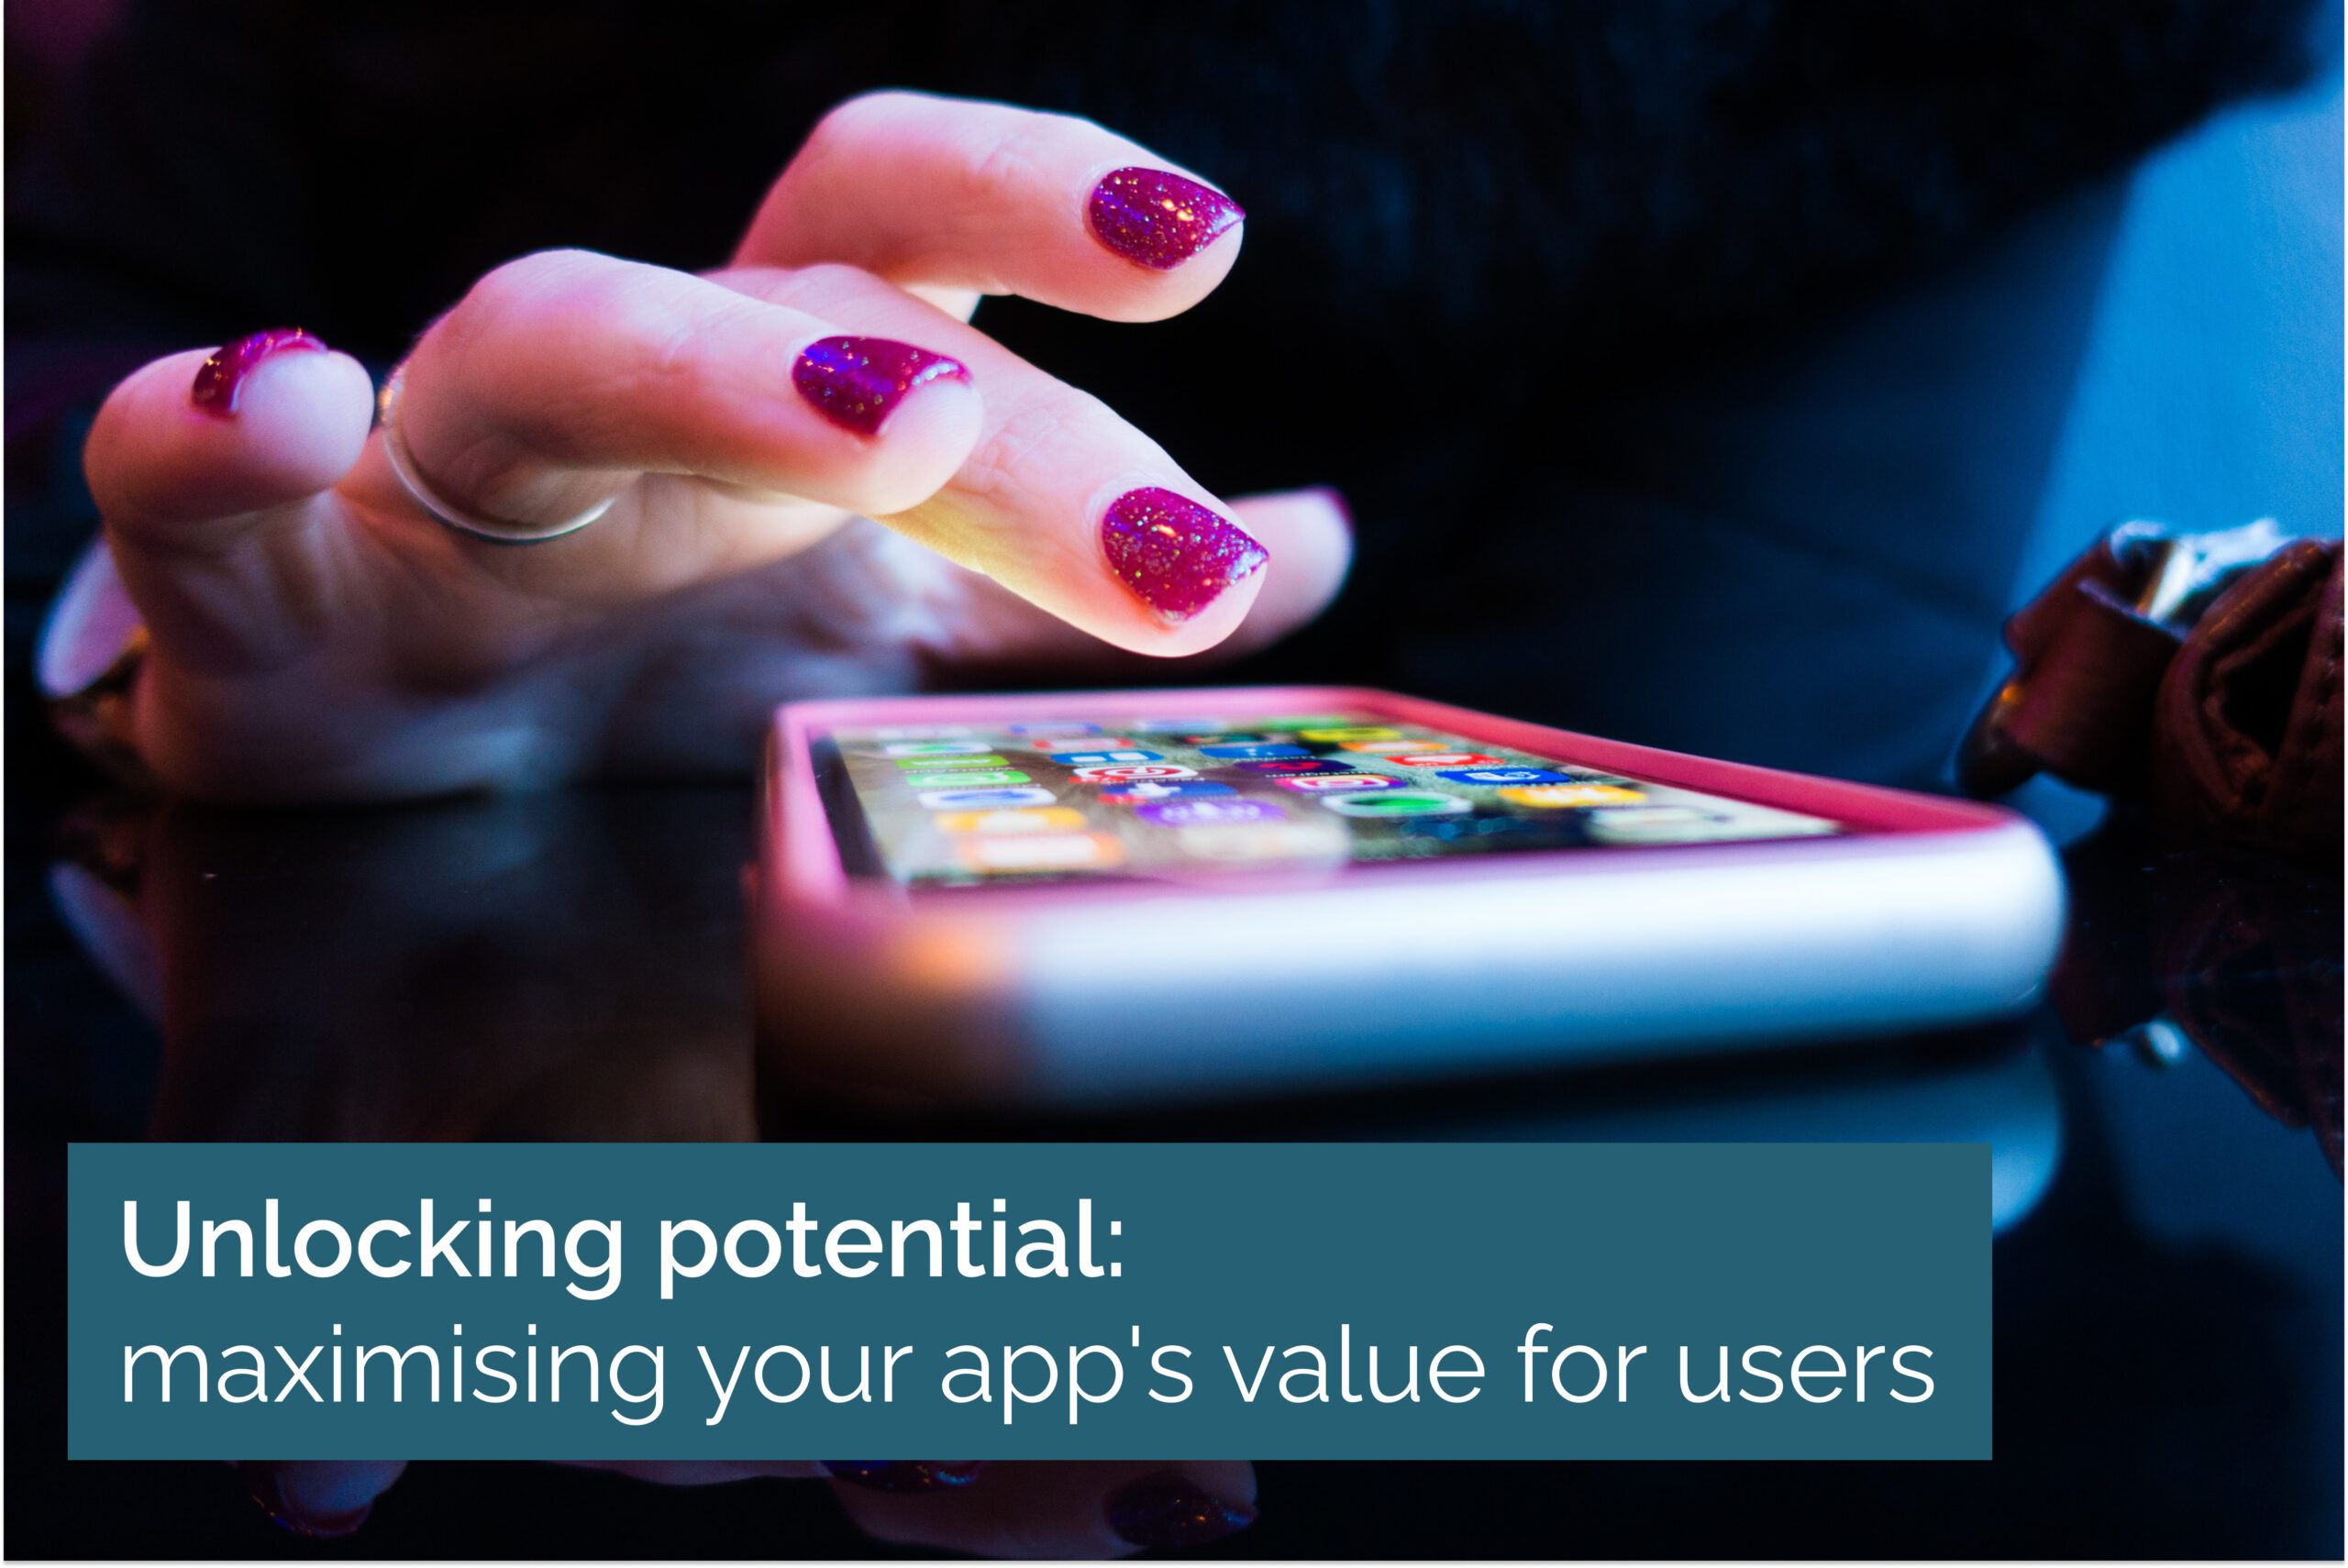 Unlocking potential: maximising your app’s value for users